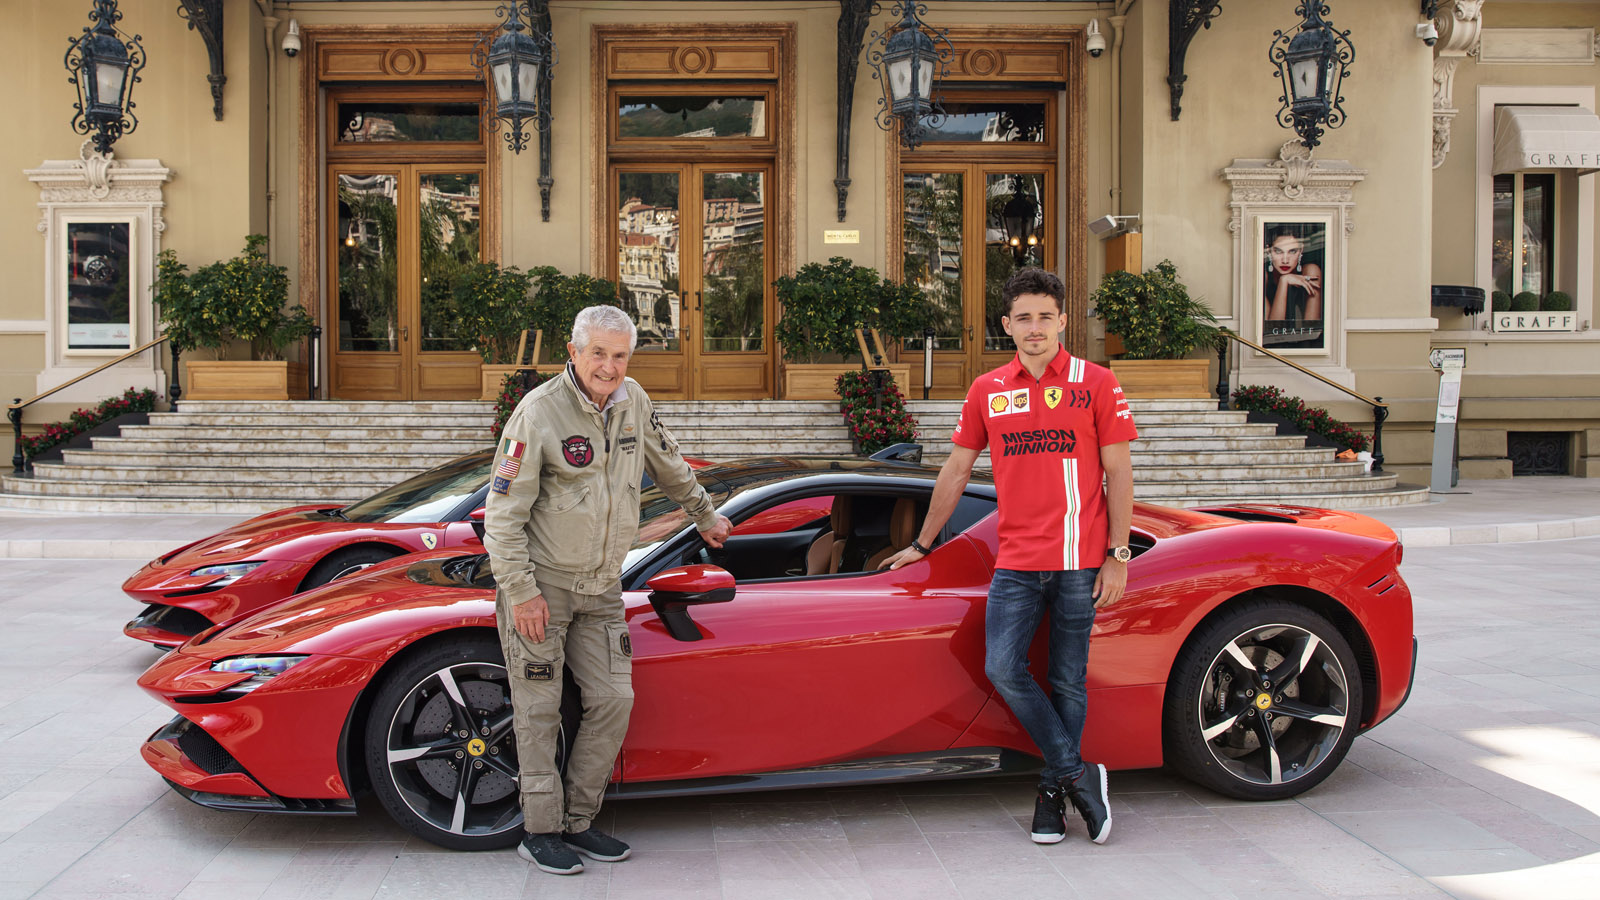 Revealed: Charles Leclerc’s amazing Ferrari supercar collection